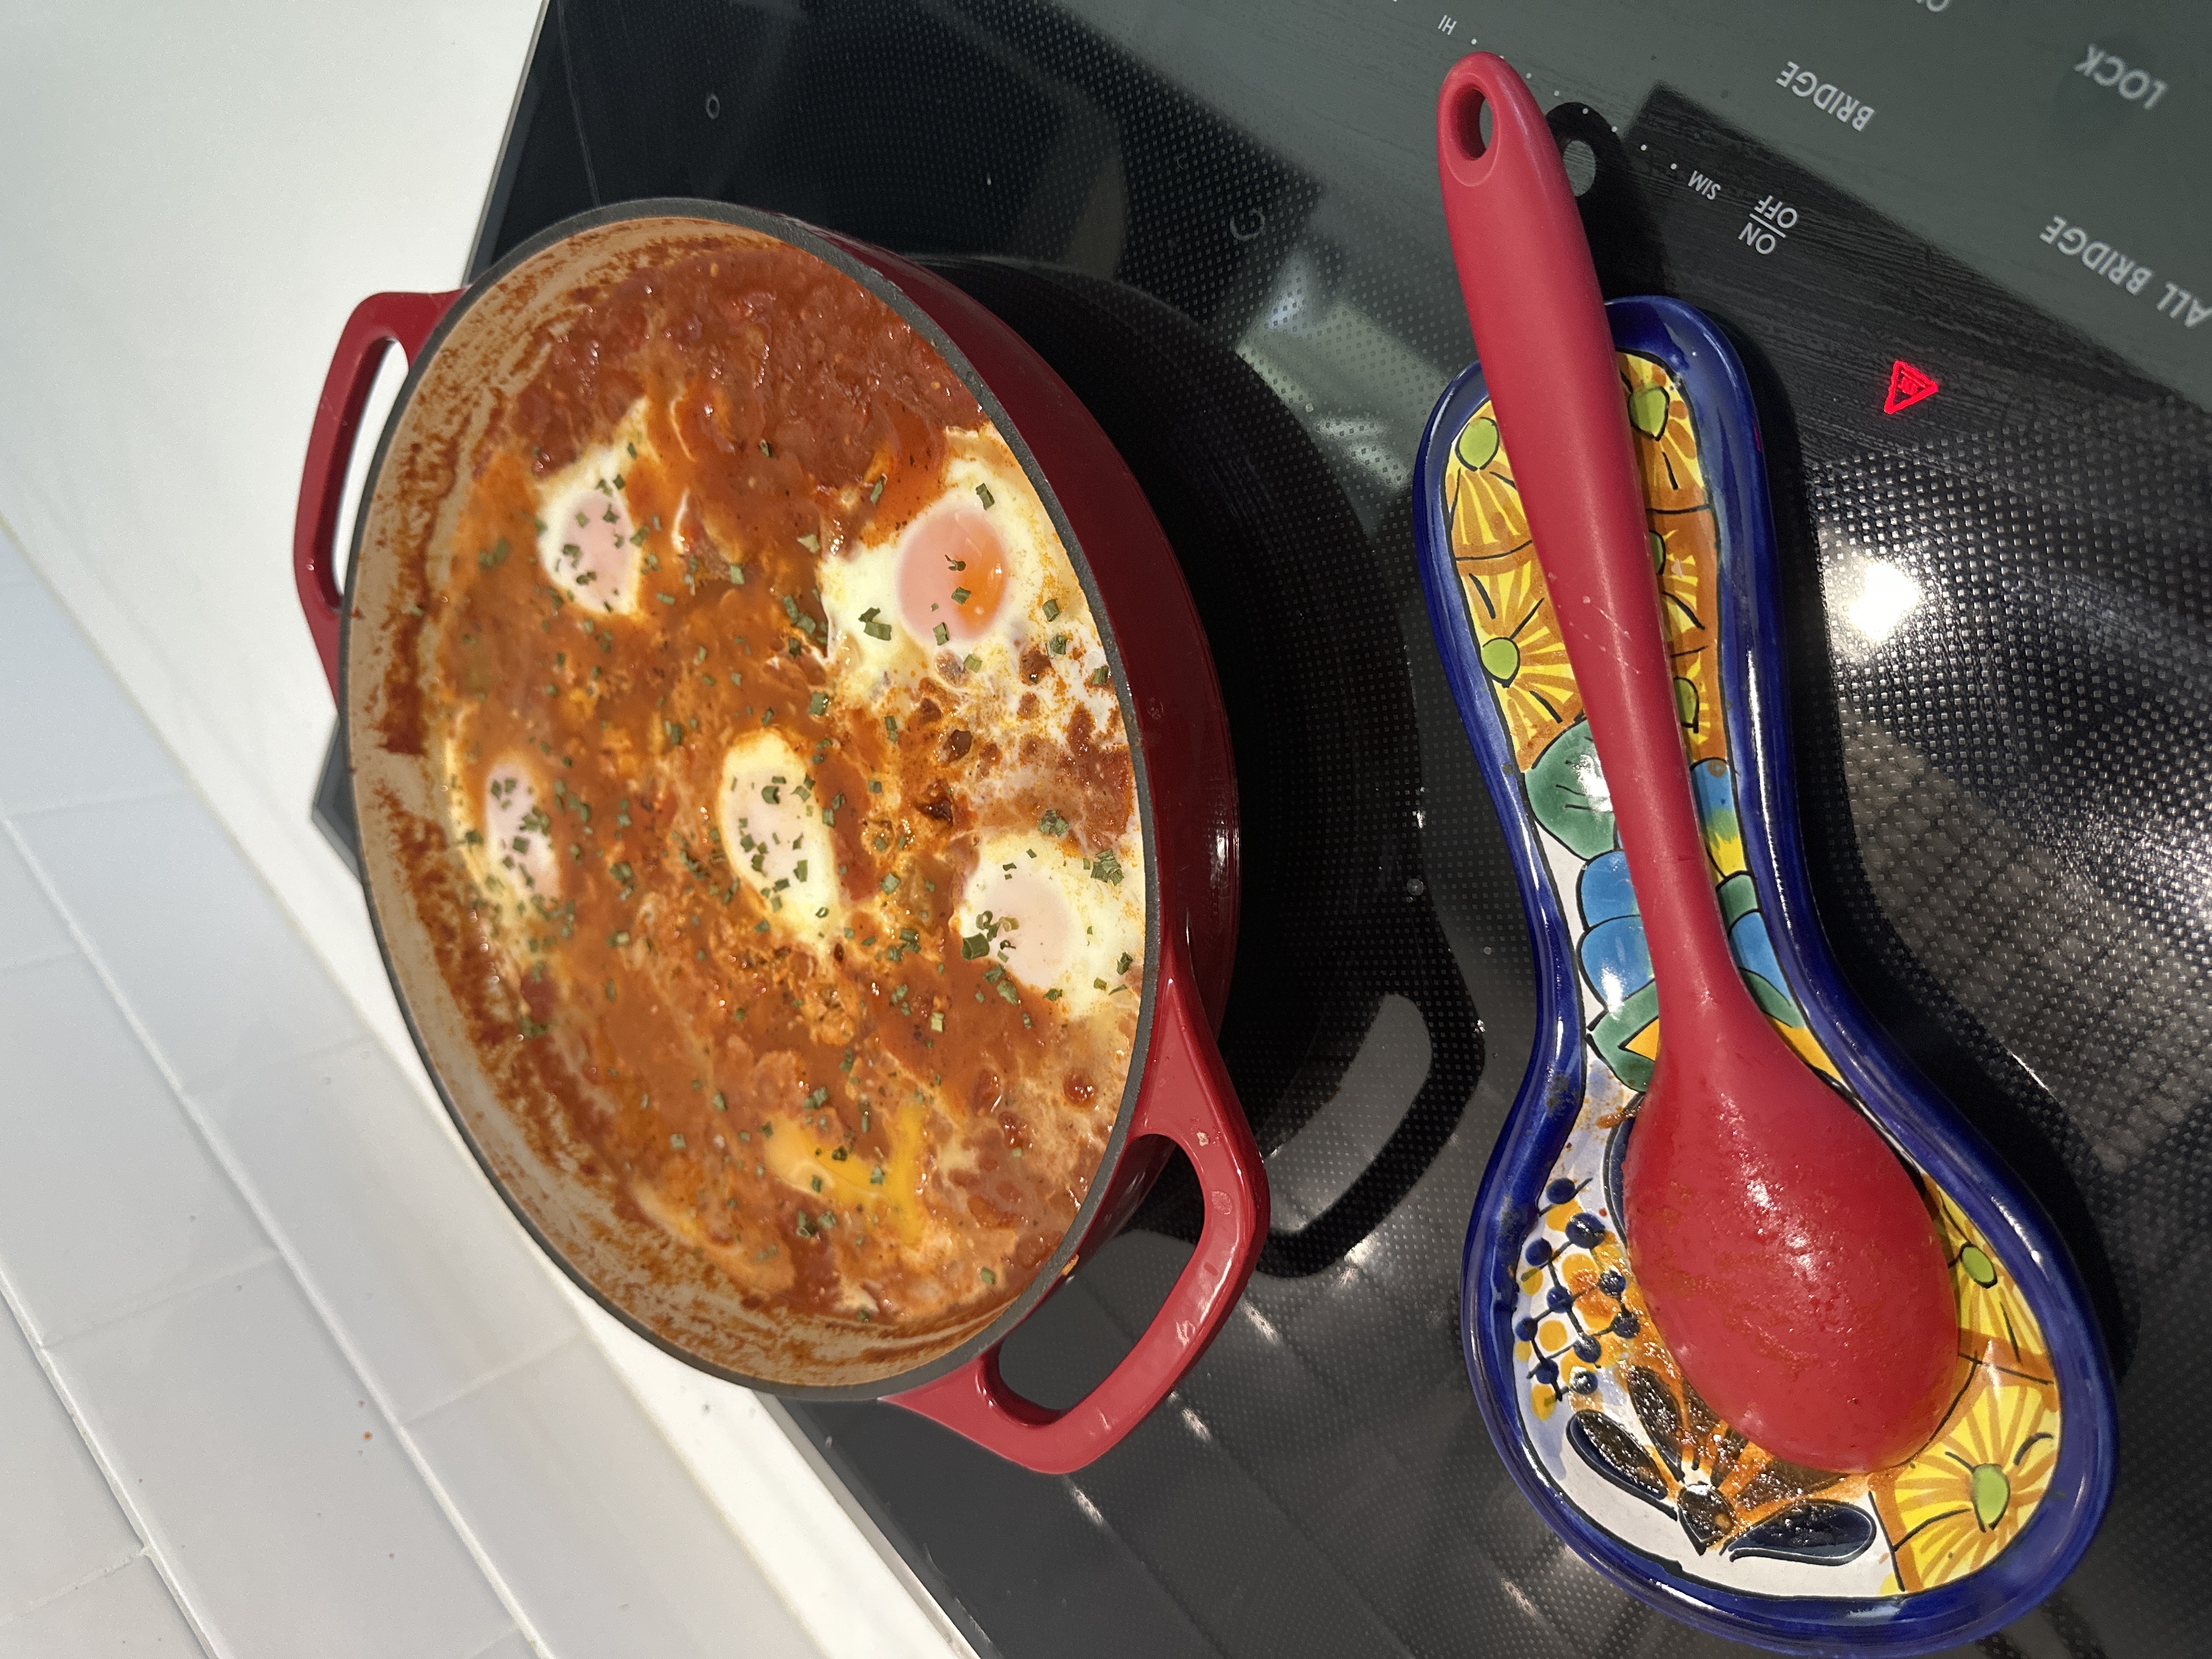 Spice Up Your Day with an Unbeatable Mexican Shakshuka